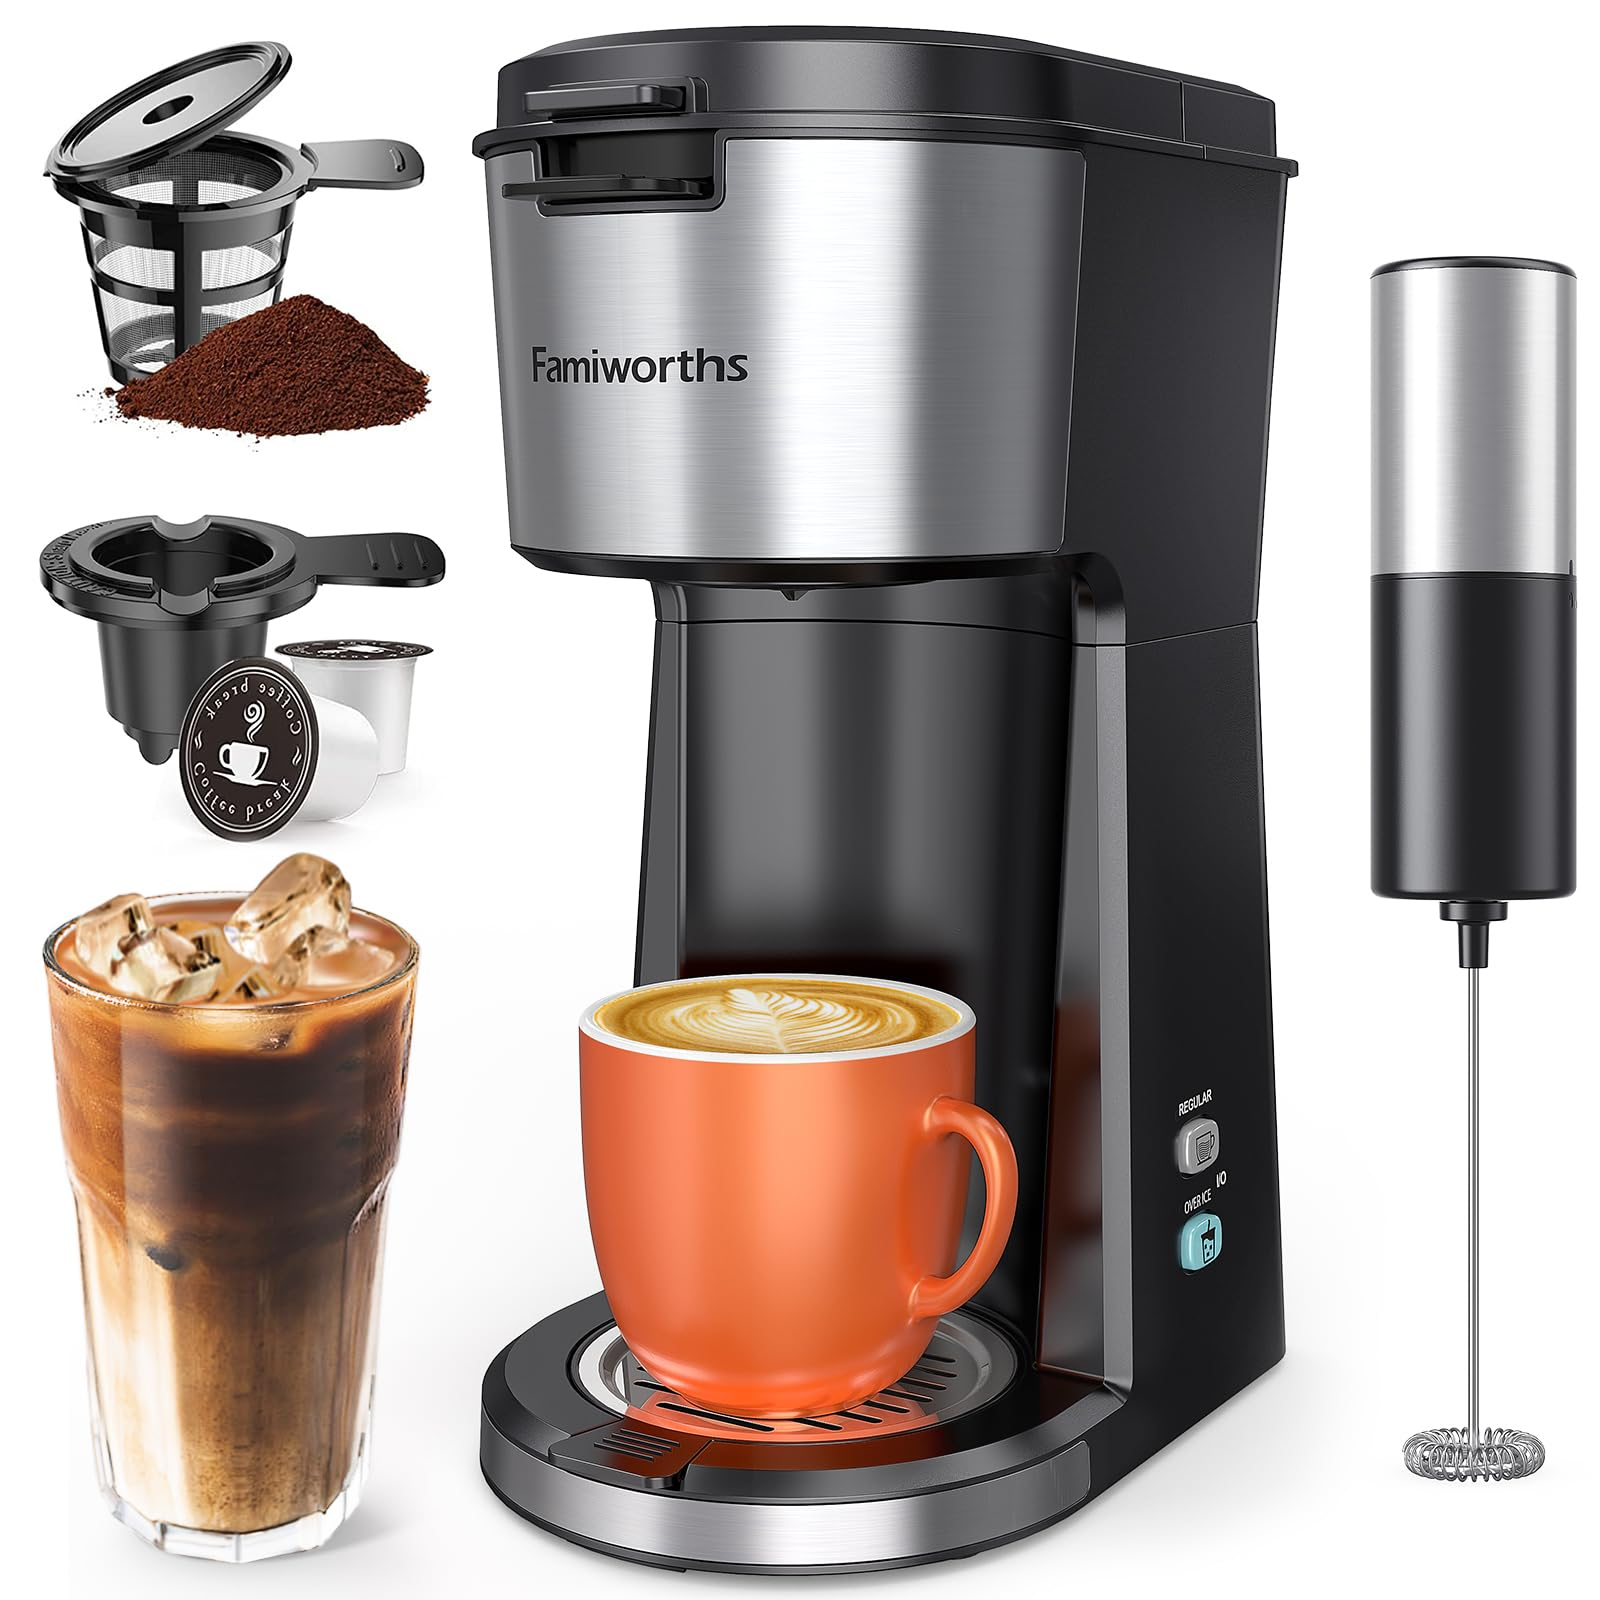 Famiworths Iced Coffee Maker with Milk Frother